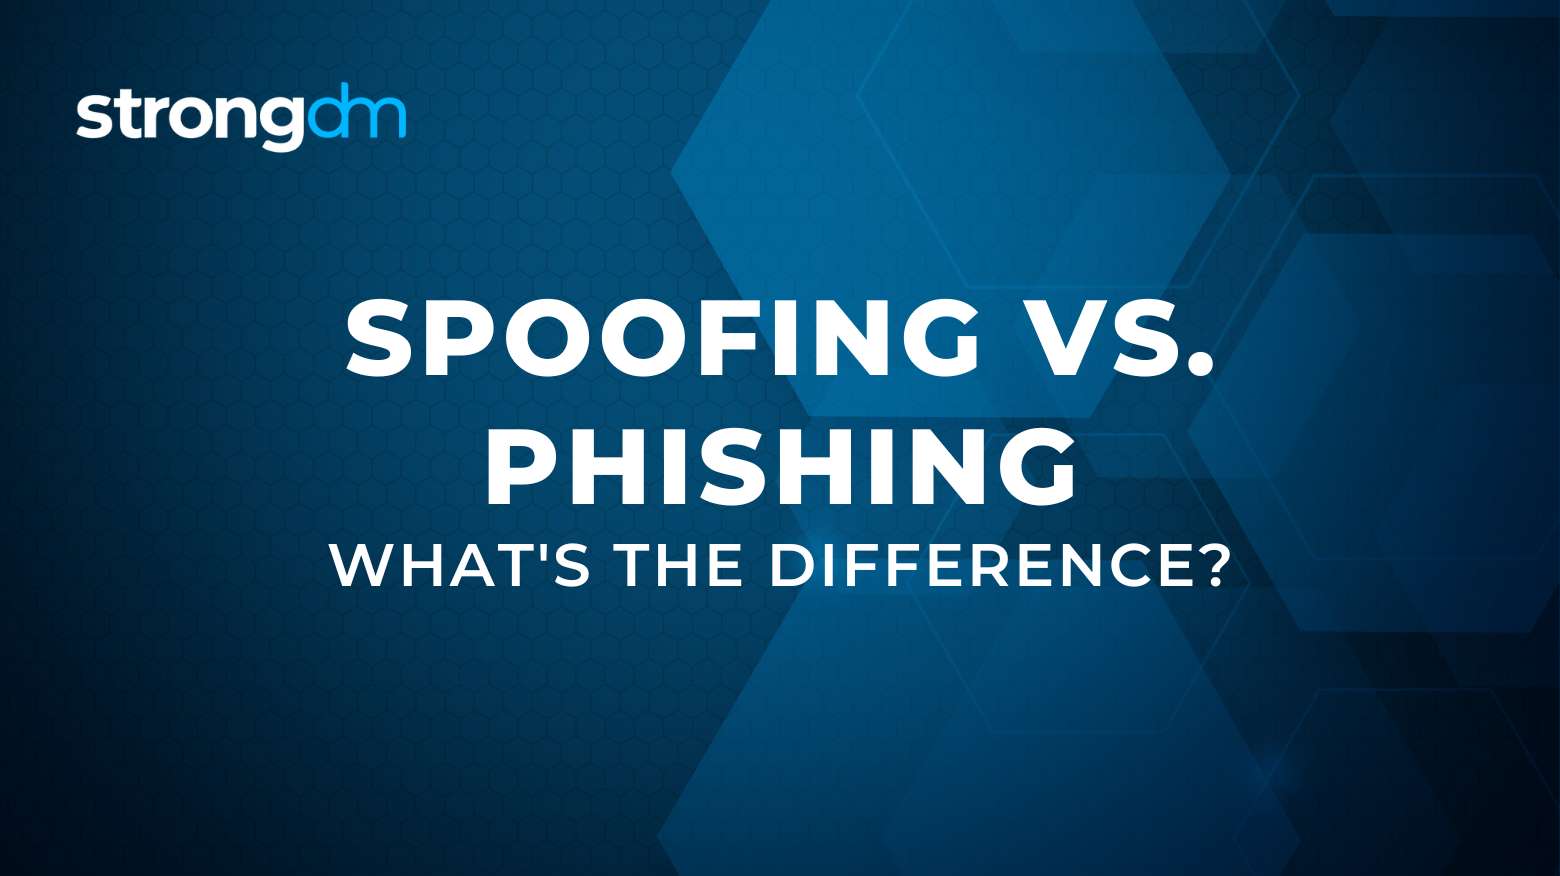 Spoofing vs Phishing: What's the Difference?